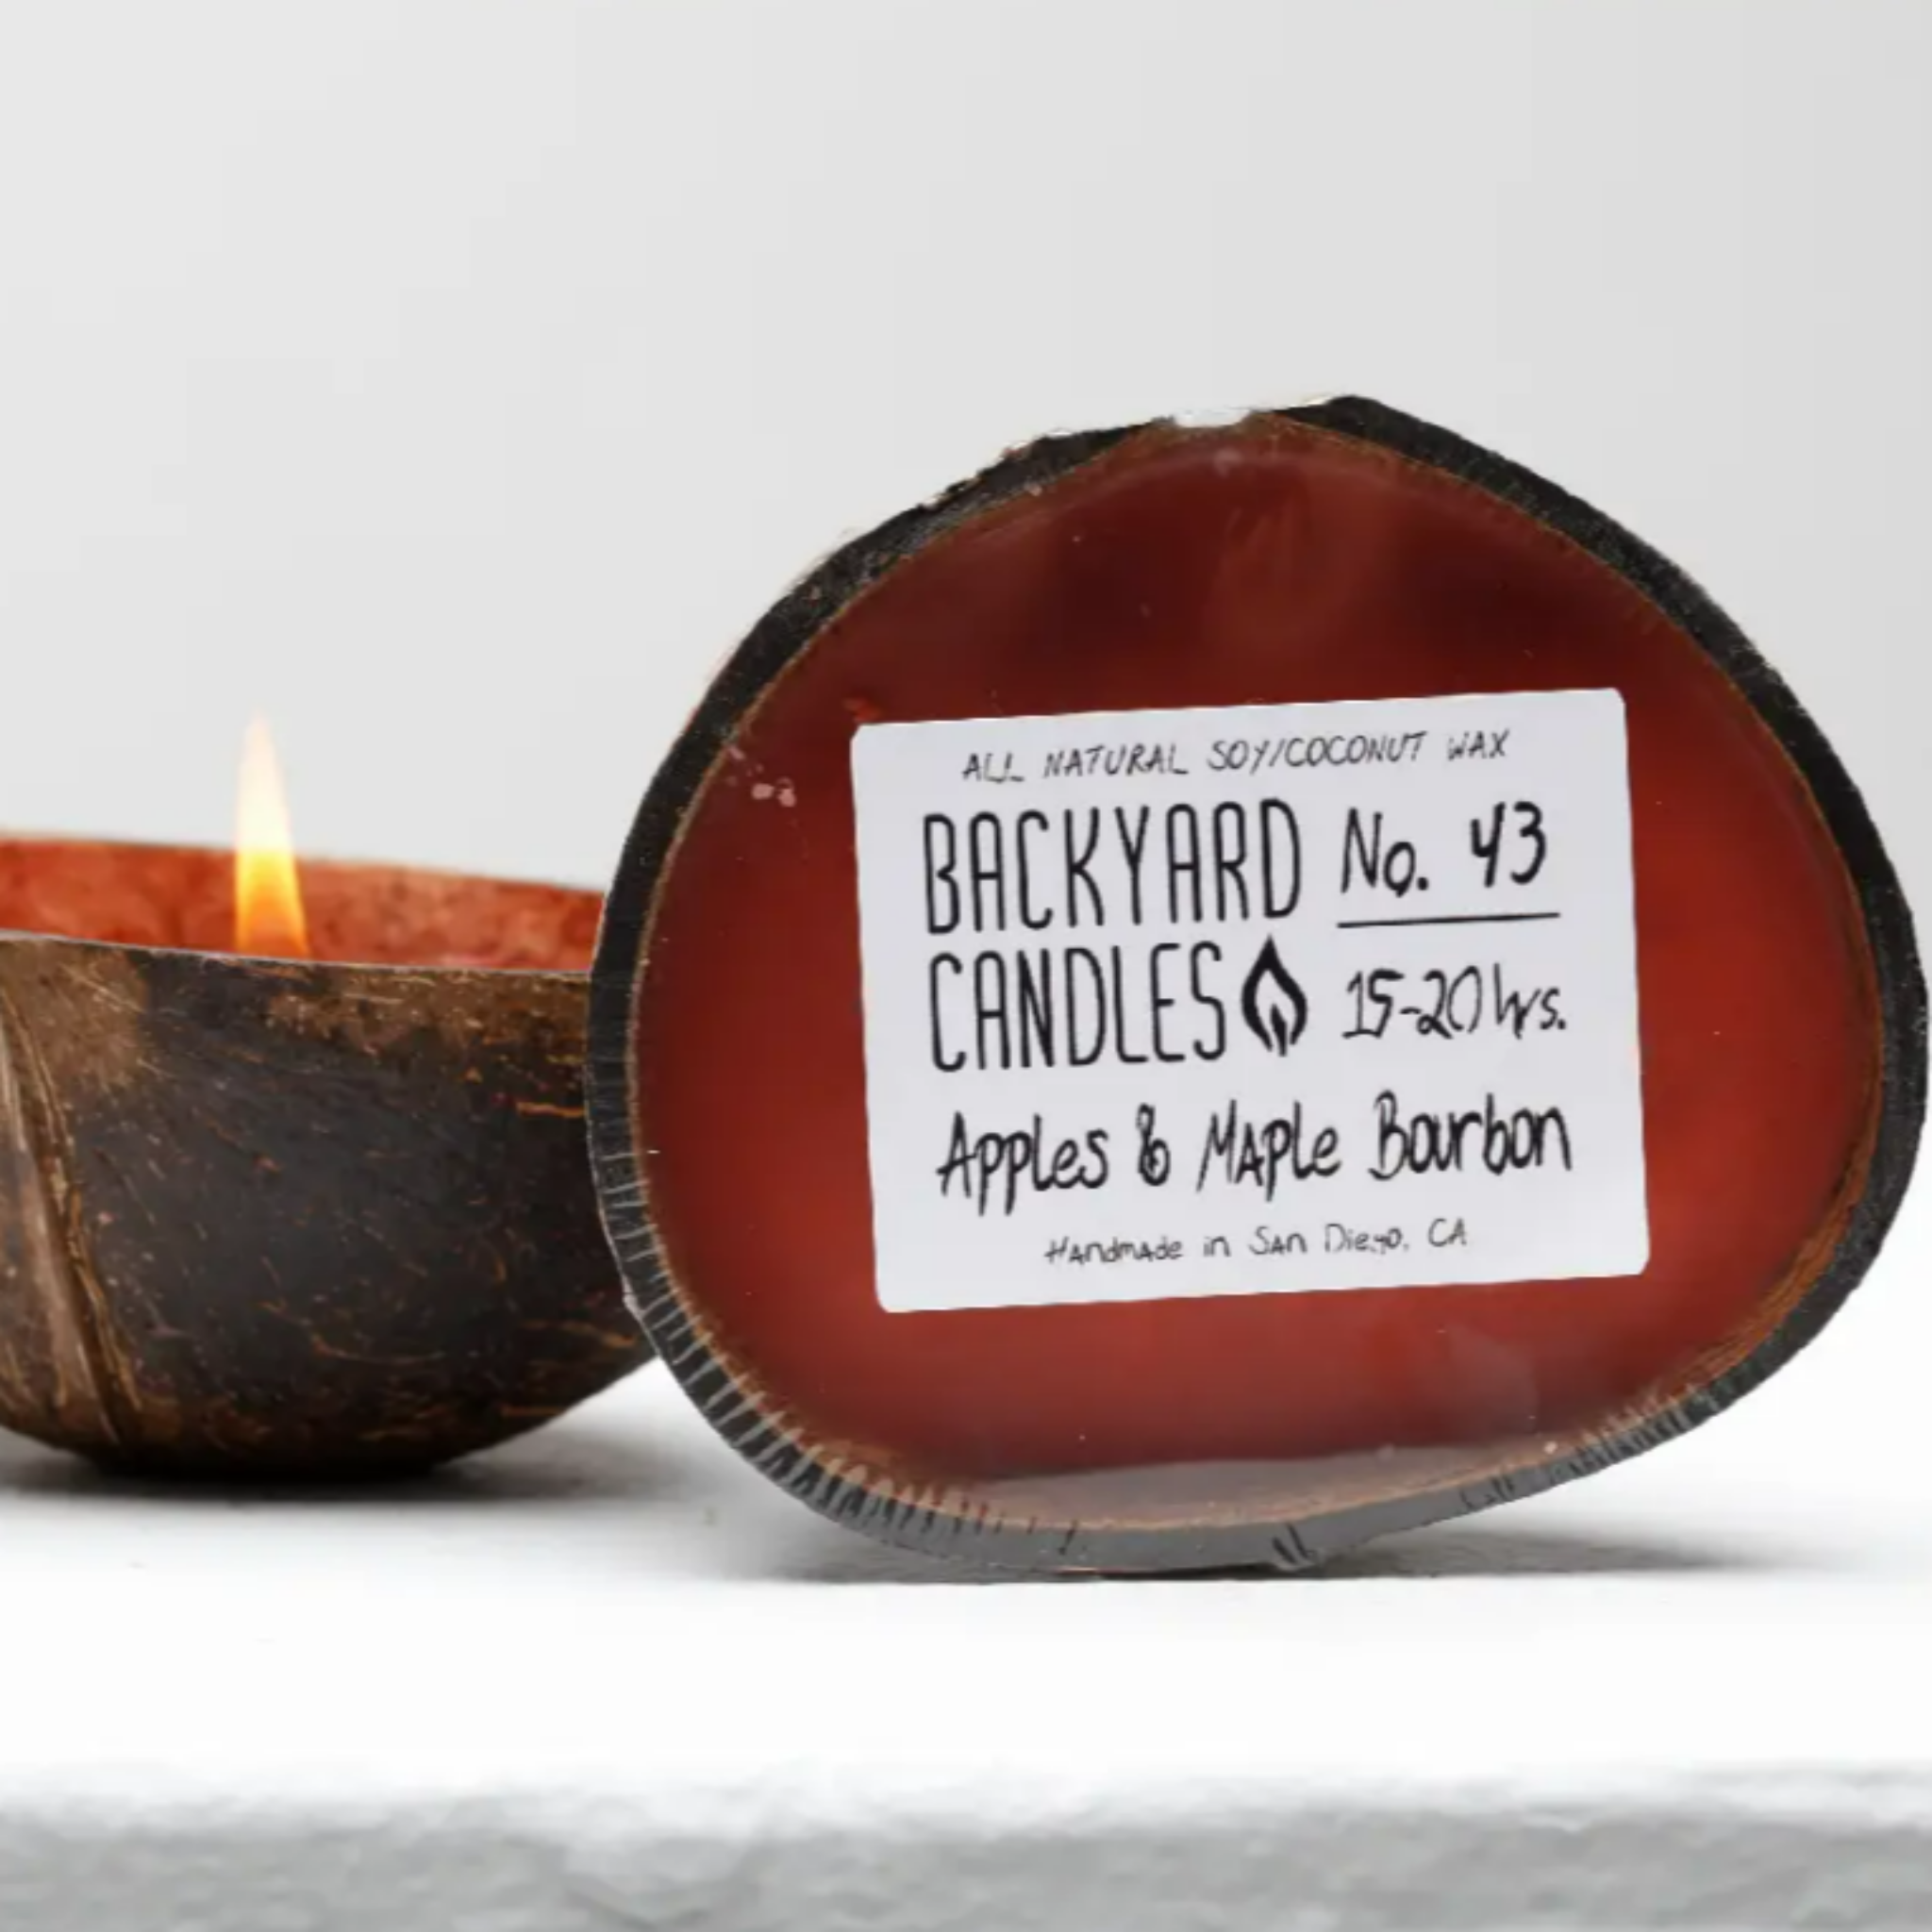 APPLES & MAPLE BOURBON Coconut Shell Candle Backyard Candles